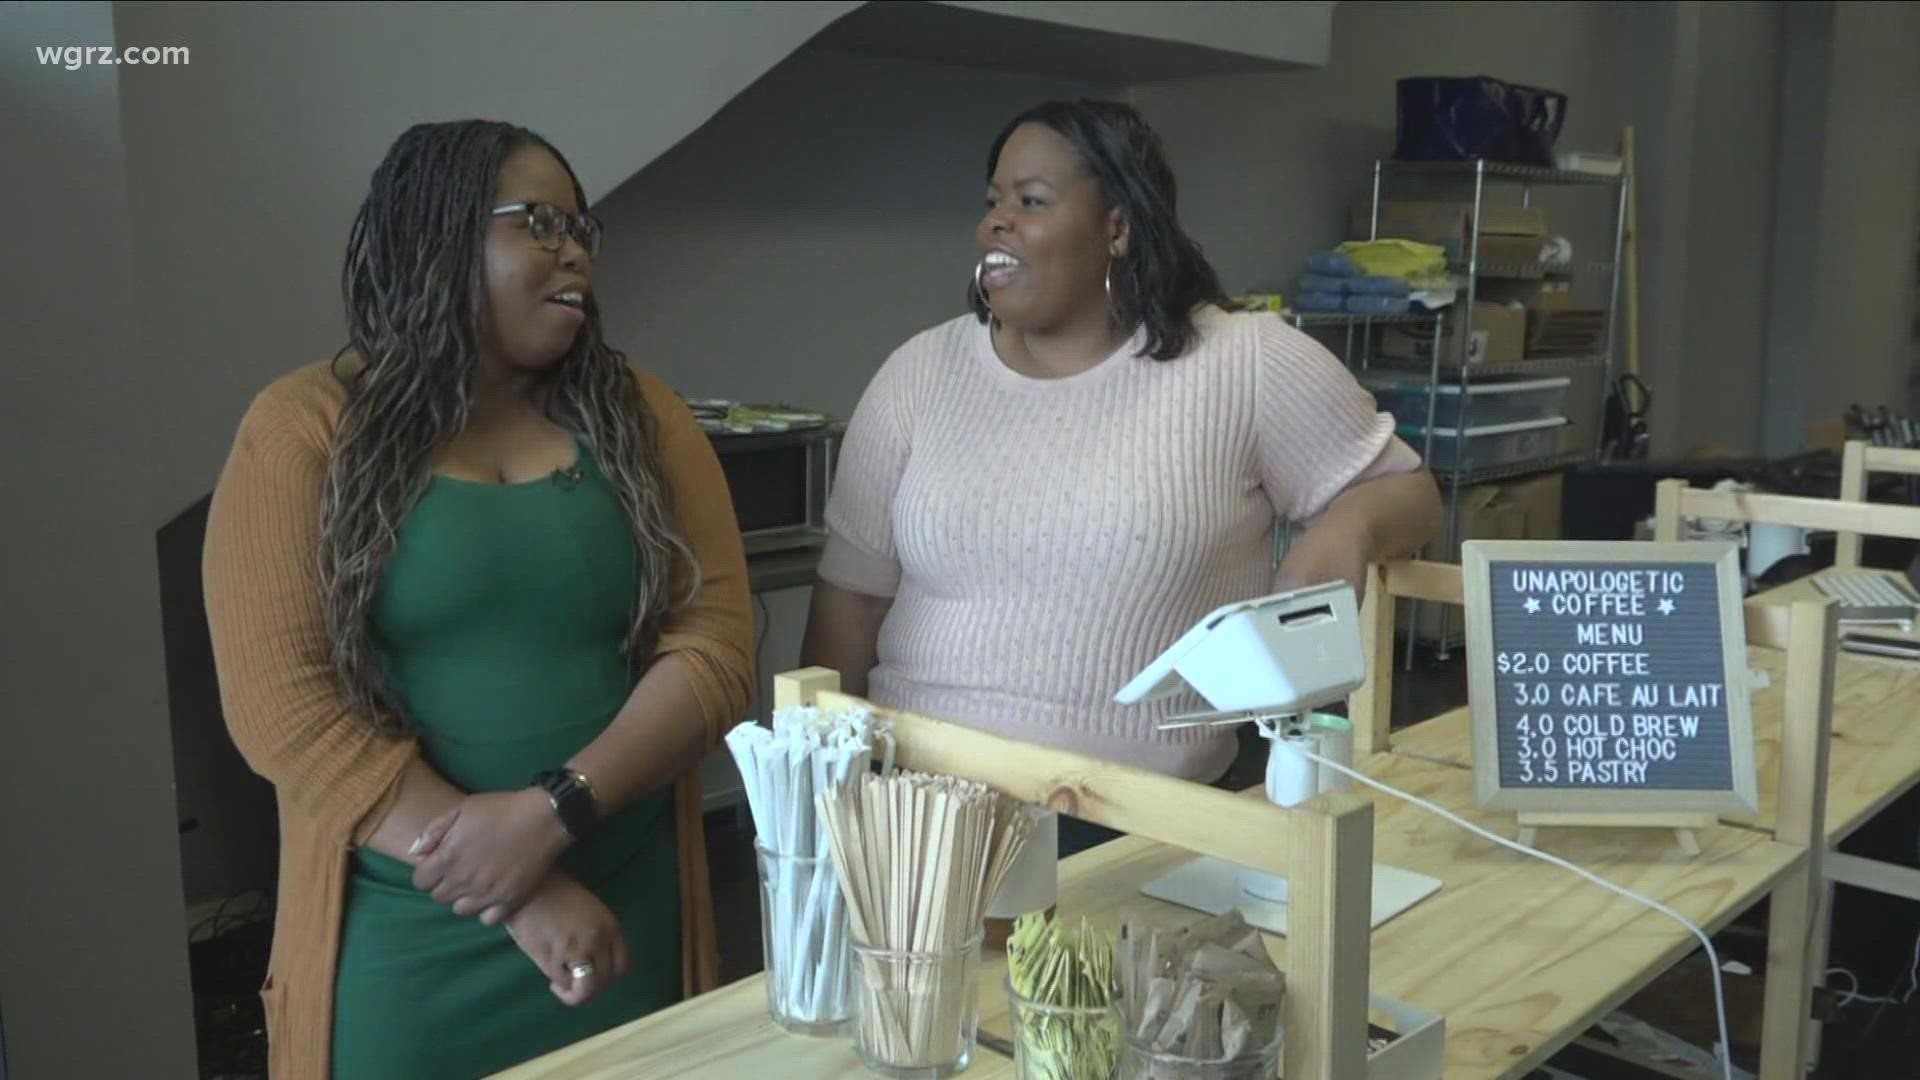 Twin sisters who own one of the only coffee shops on Buffalo's East Side are now using their business as a hub for donations to help those who are hurting.